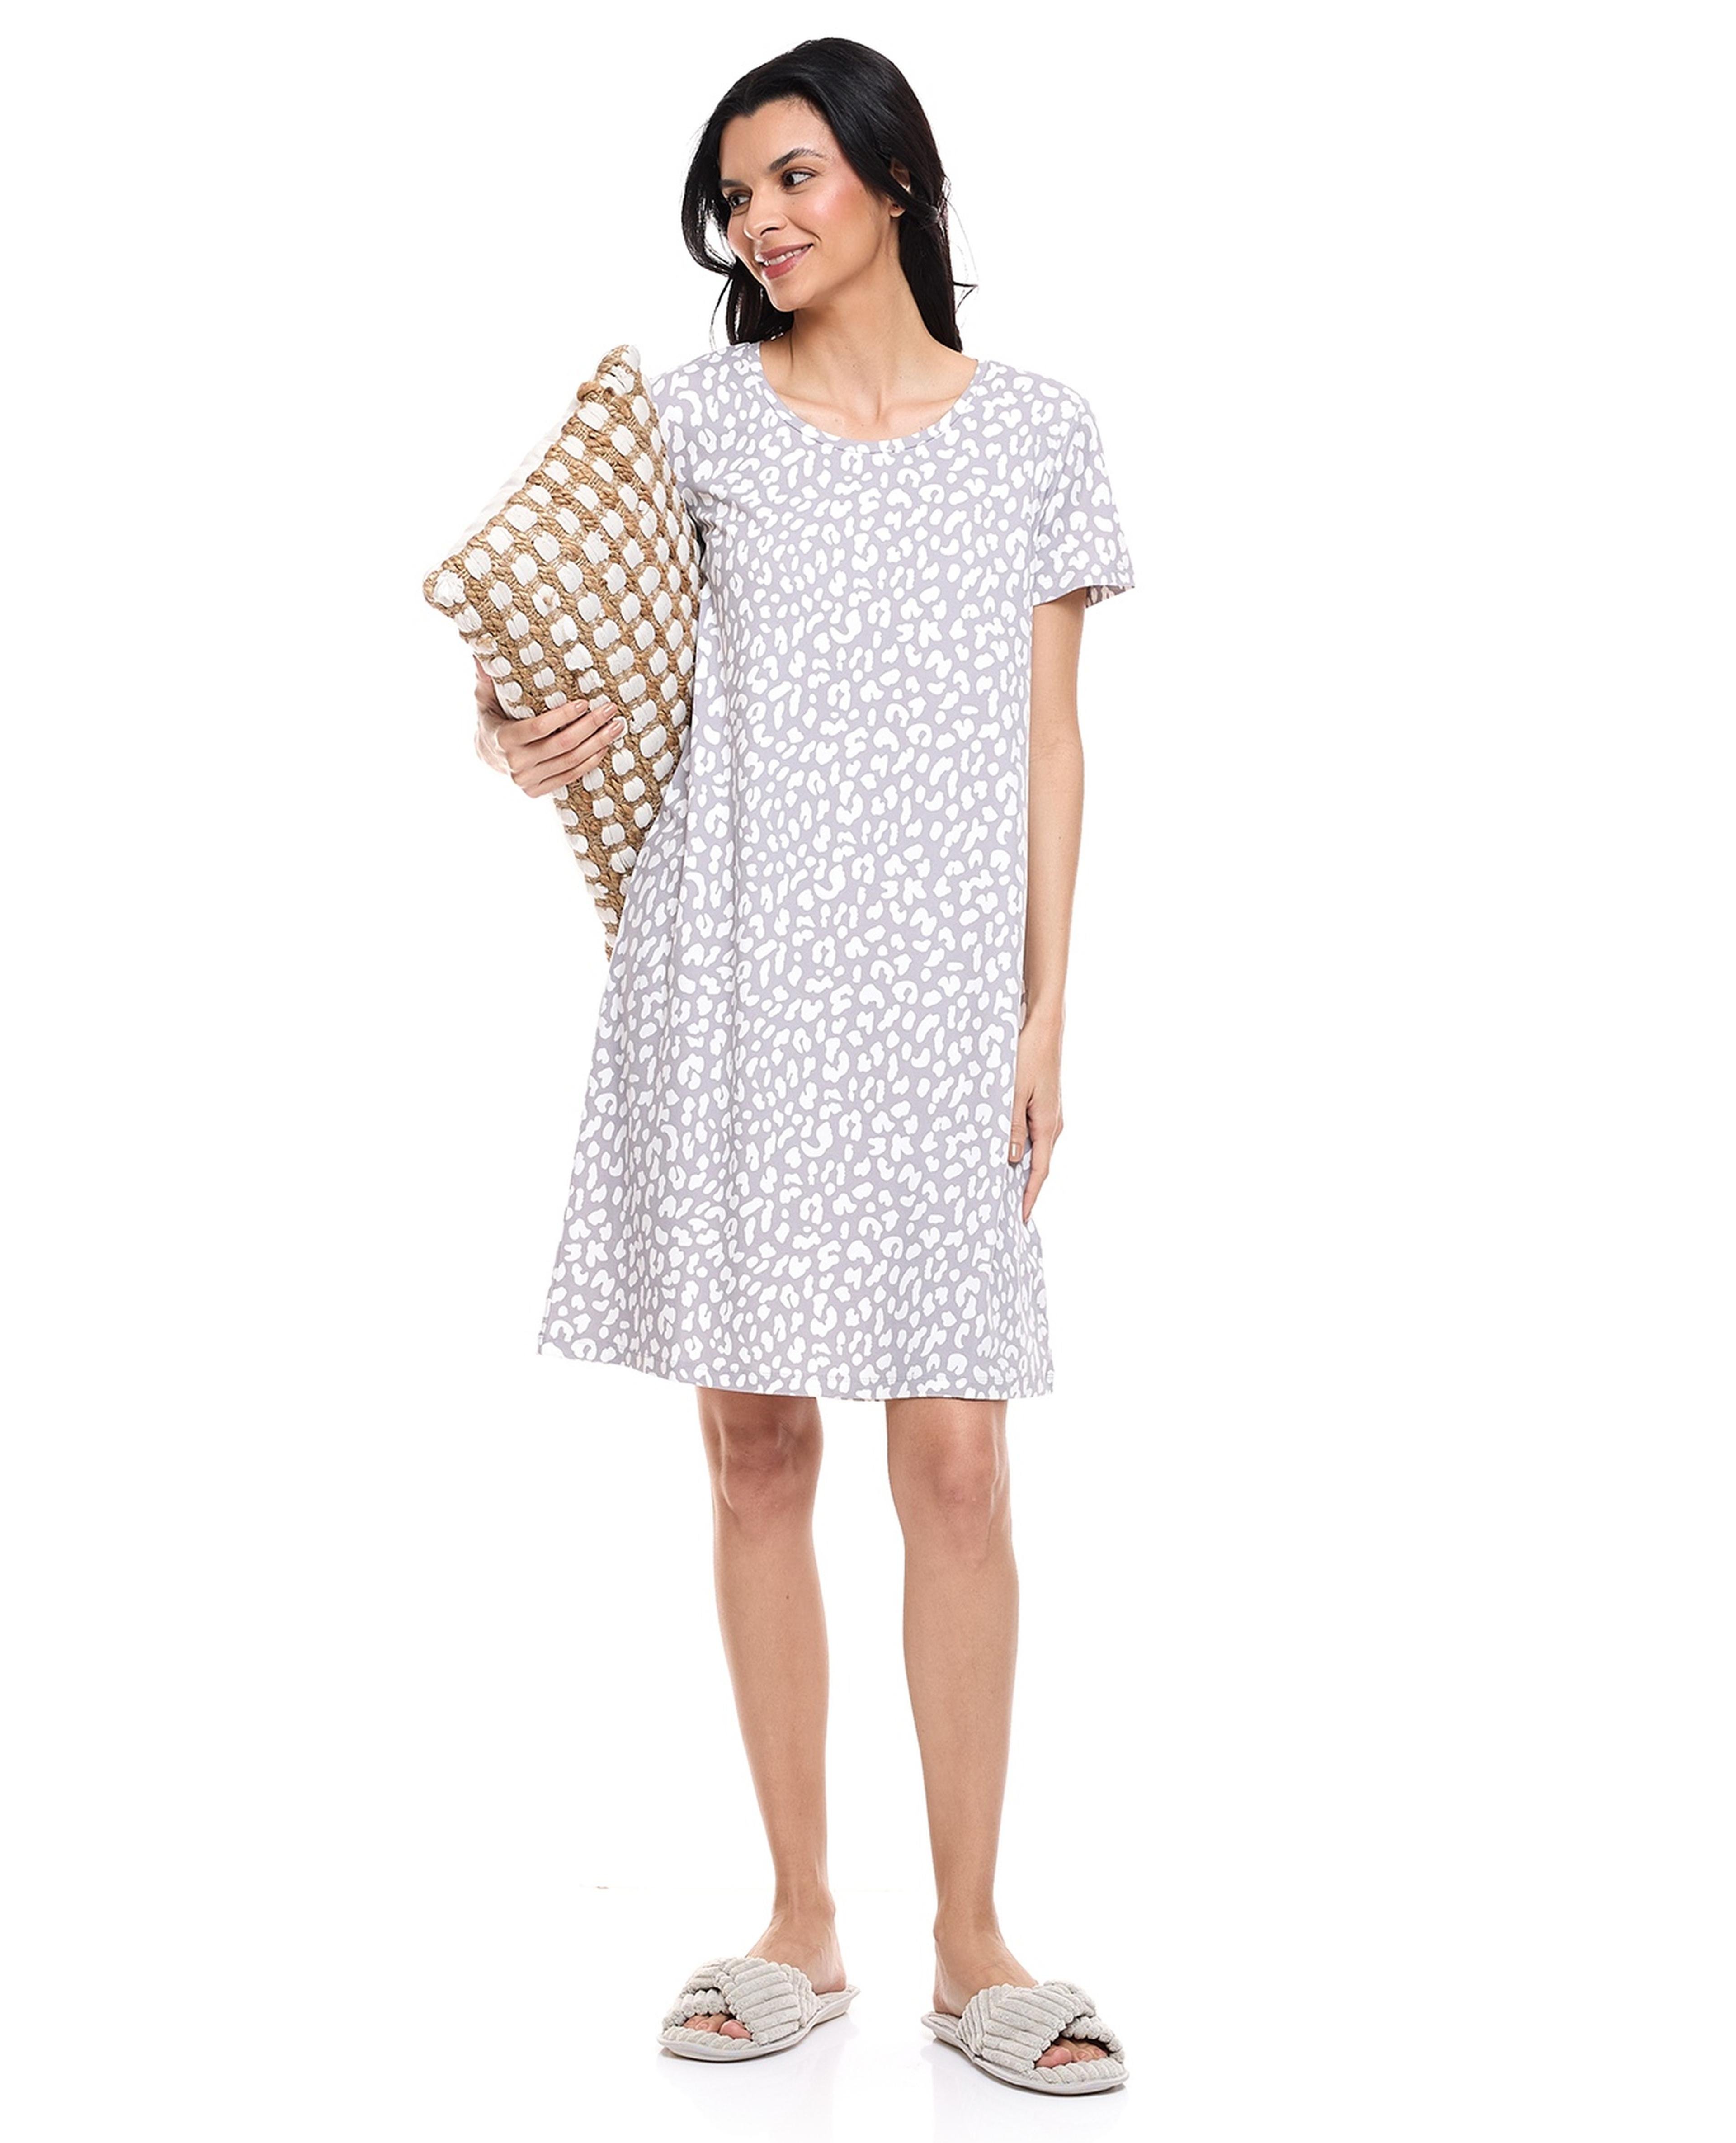 Animal Printed Nightdress with Crew Neck and Short Sleeves